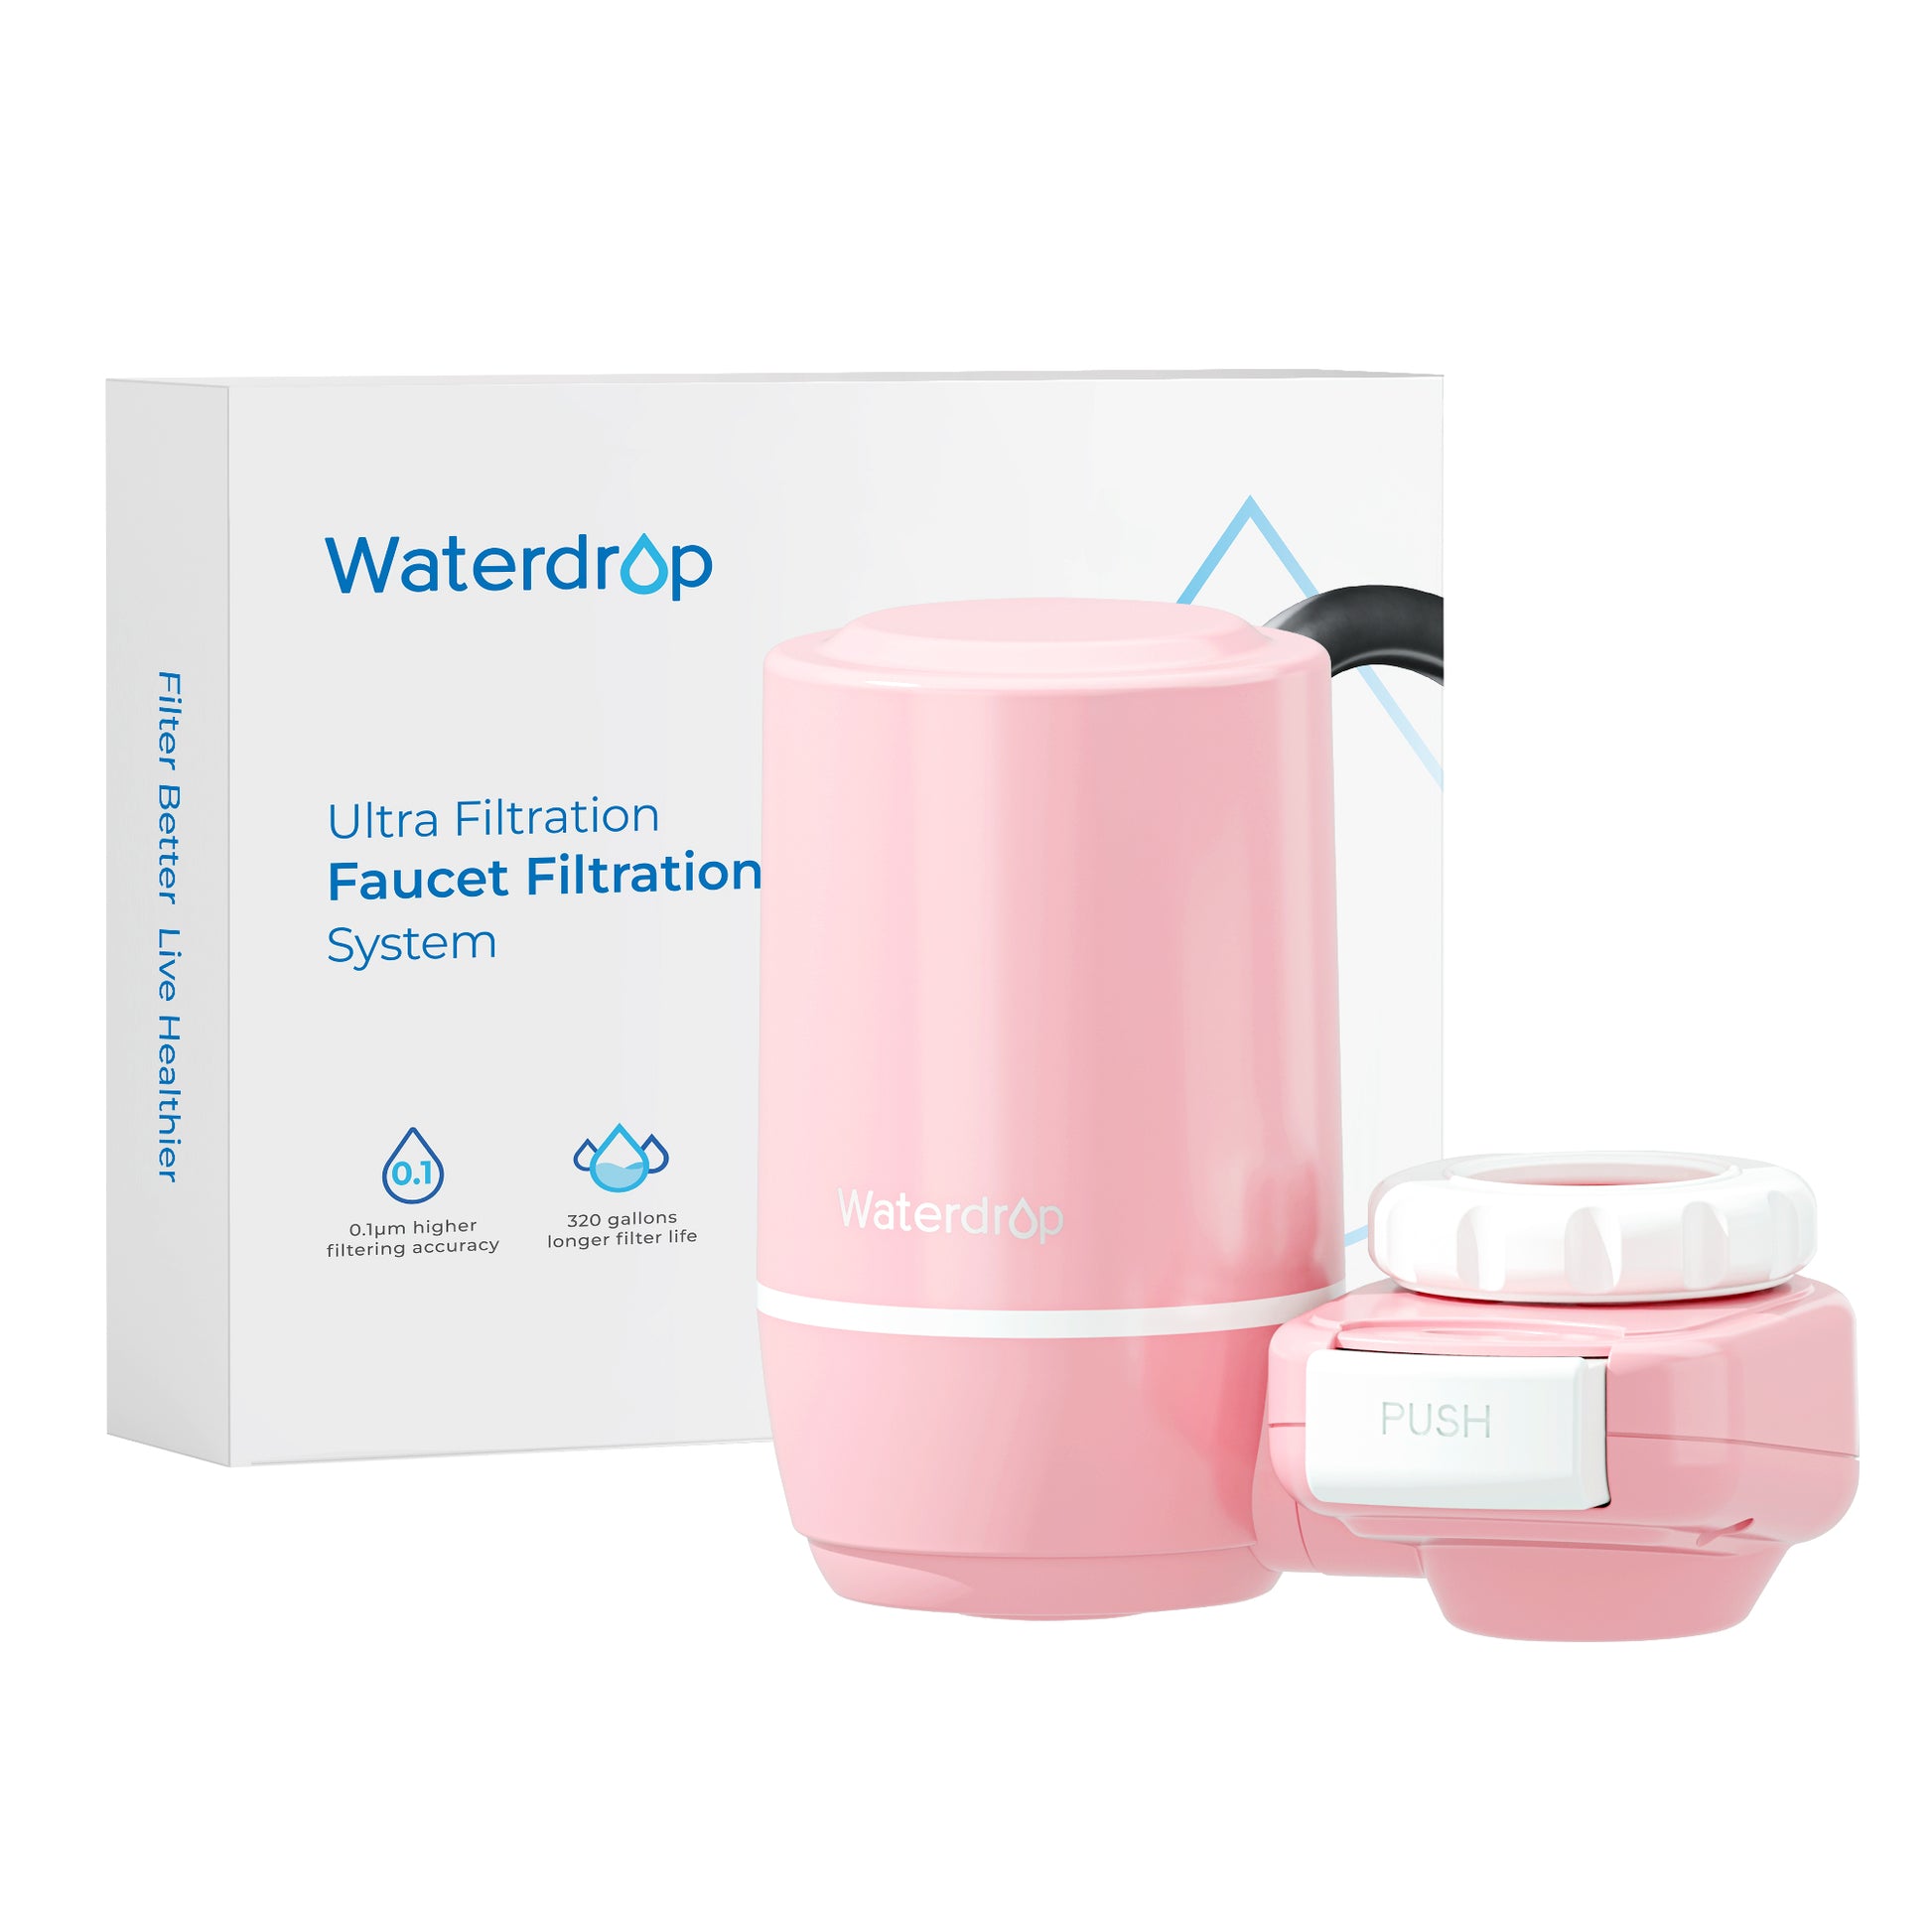 Waterdrop Ultra Filtration System for Skin Care, Faucet Water Filter, 320 Gallons Longer Life Faucet, Tap Water Filter, Reduces Chlorine, Fits Standard Faucets, Pink